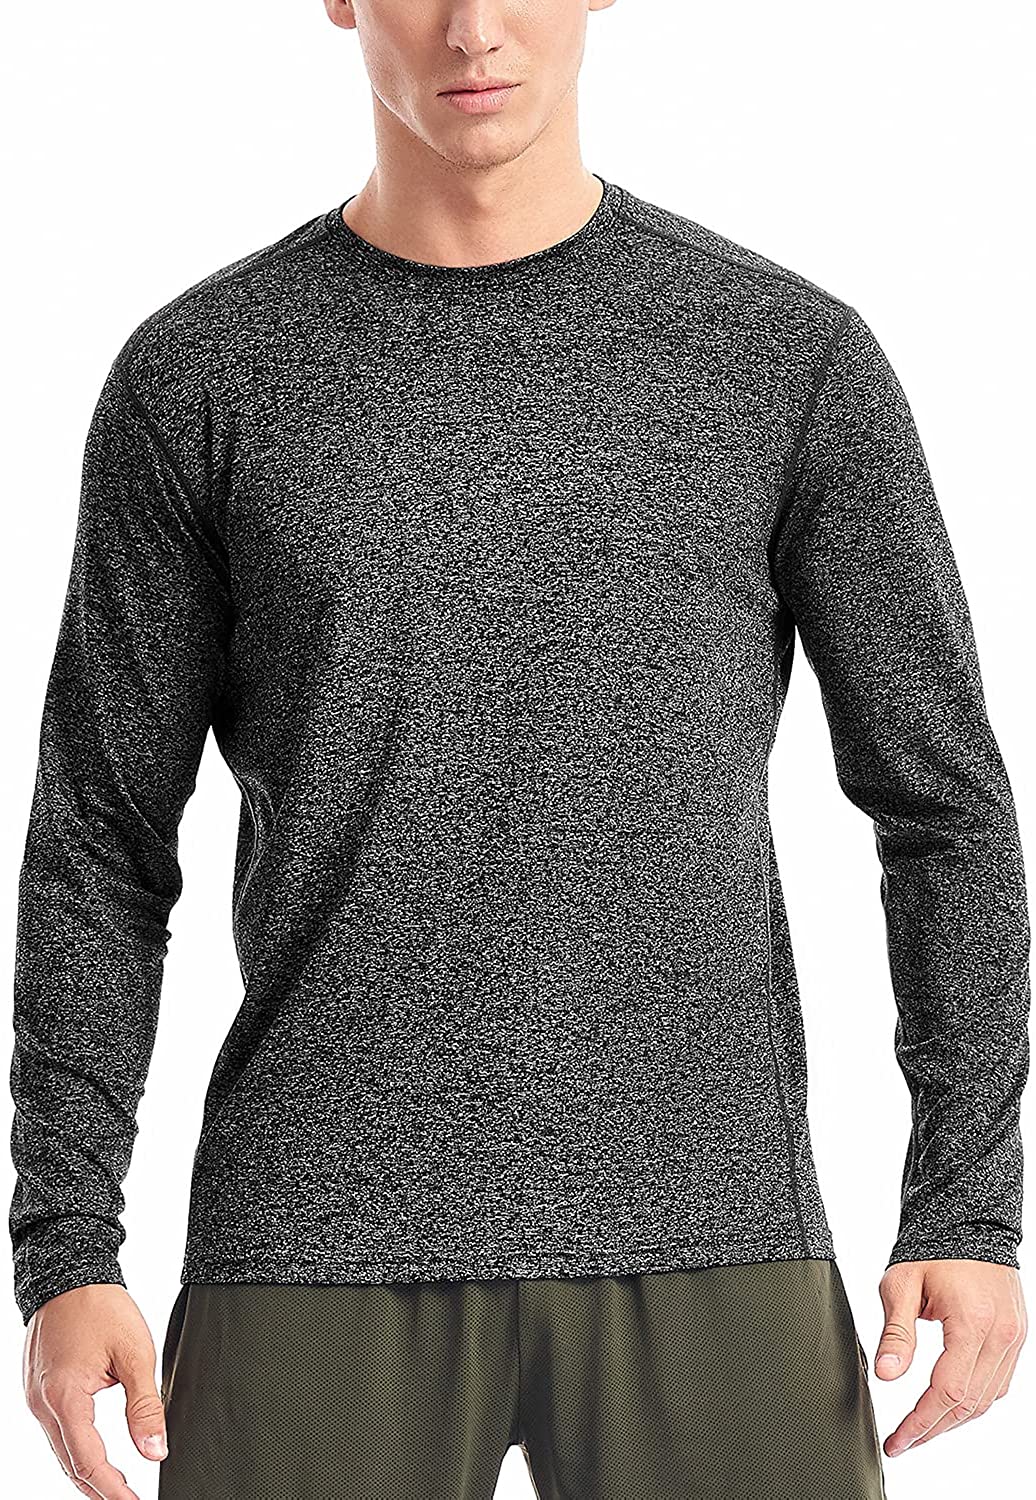 Moisture Wicking Athletic Shirts for Men Long Sleeve Workout Shirt 